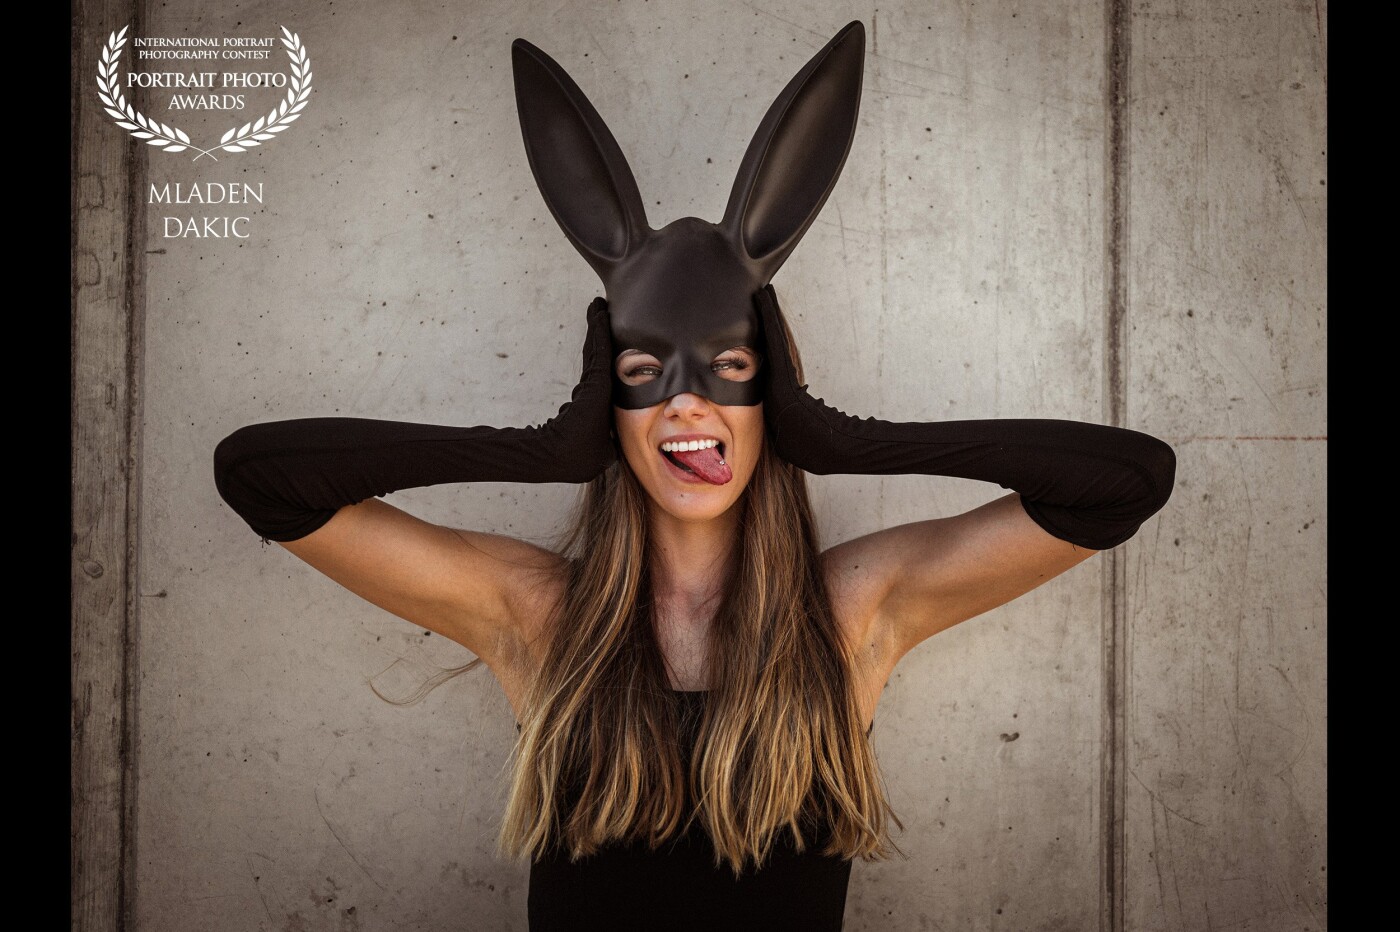 "I wish to have some pictures with a bunny mask". With these words of my model beauty Vani we started our project bunny mask. It was a hot summer saturday when we made this pictures on a rooftop parkig. We had a funny afernoon and I think it is visible in the pictures. This photo one is my absolute favourite because you can see the mood on the set. I called it "Bunnies have fun". I used natural light only.